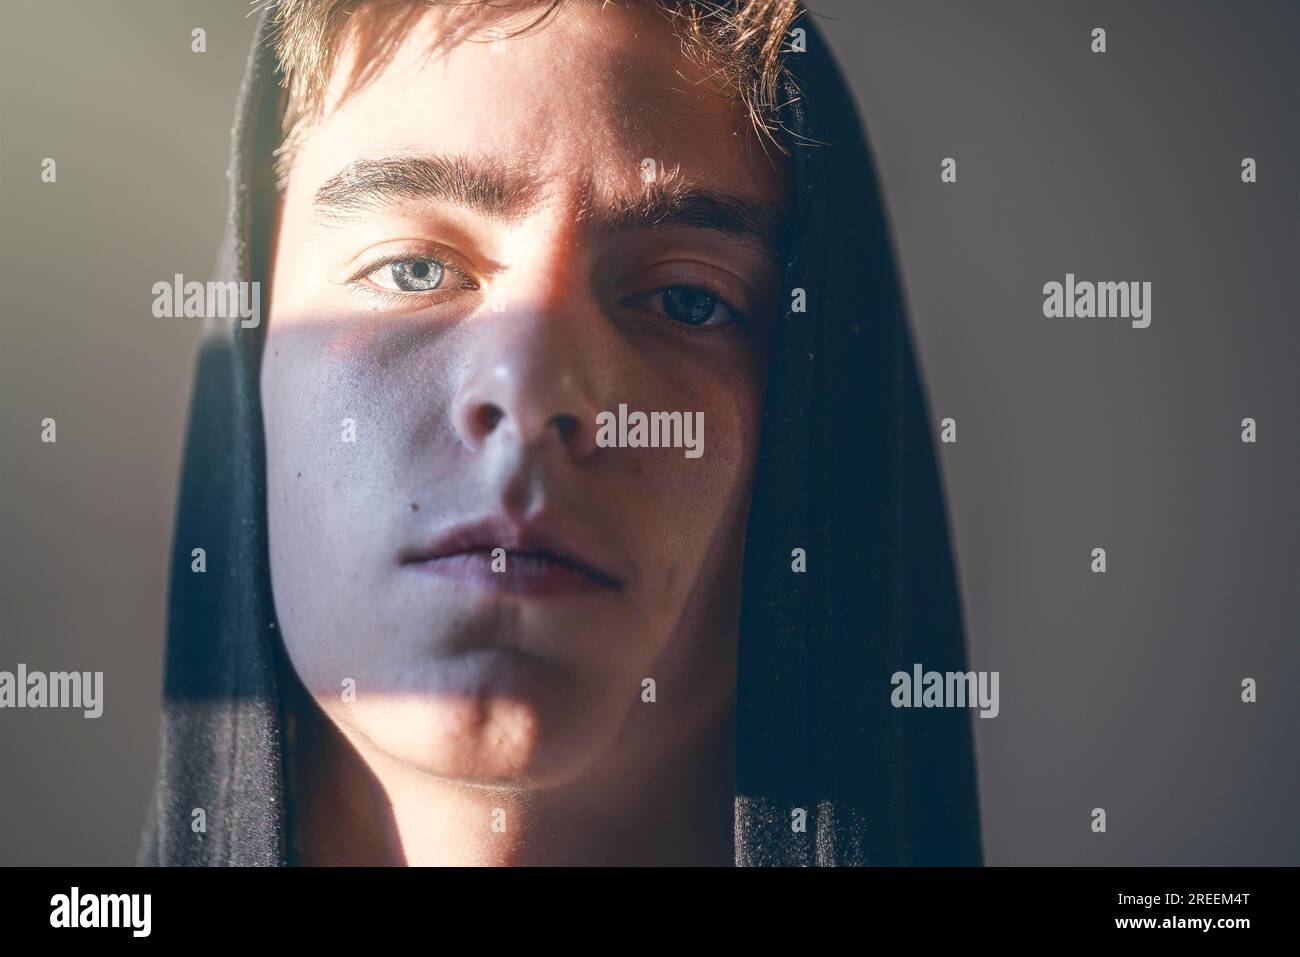 Close up portrait of a young man with hoodie Stock Photo